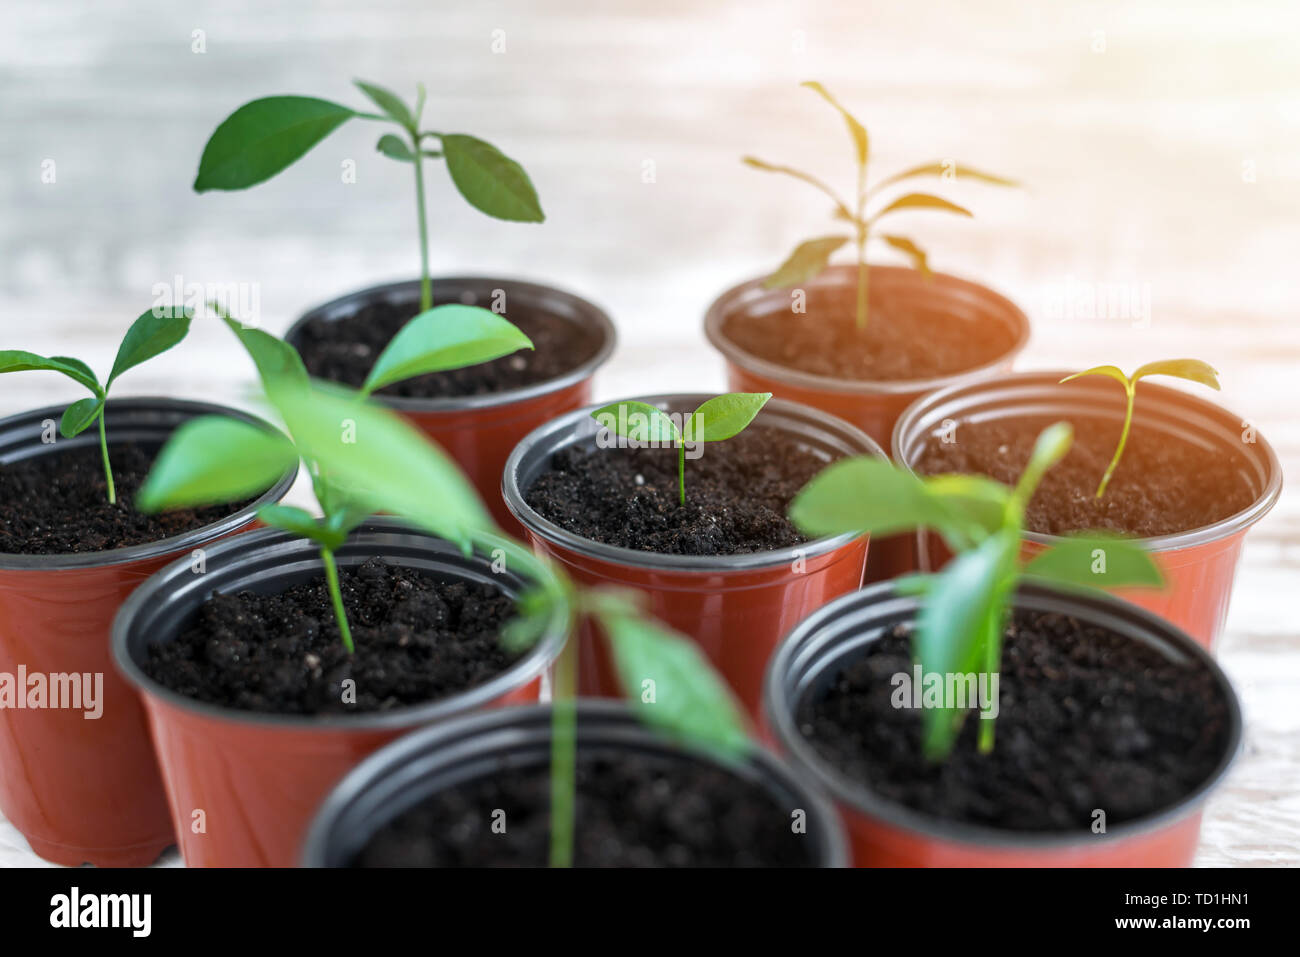 Green young plants in brown pots. Potted plants on white wooden background. Stock Photo